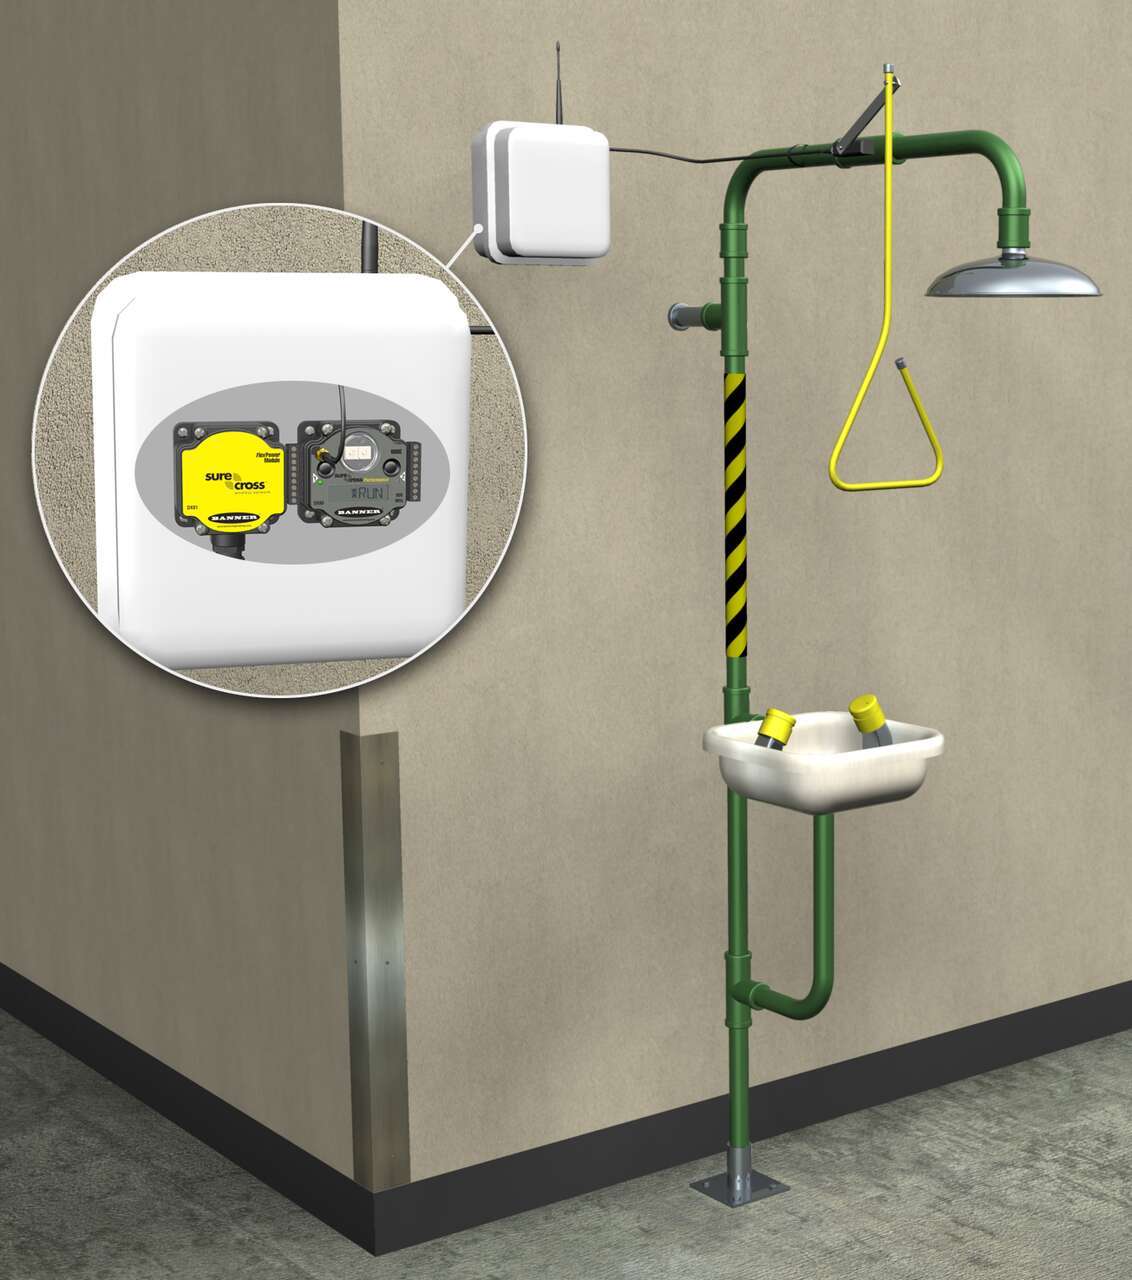 Process Monitoring, Reporting the Location of an Activated Emergency Shower